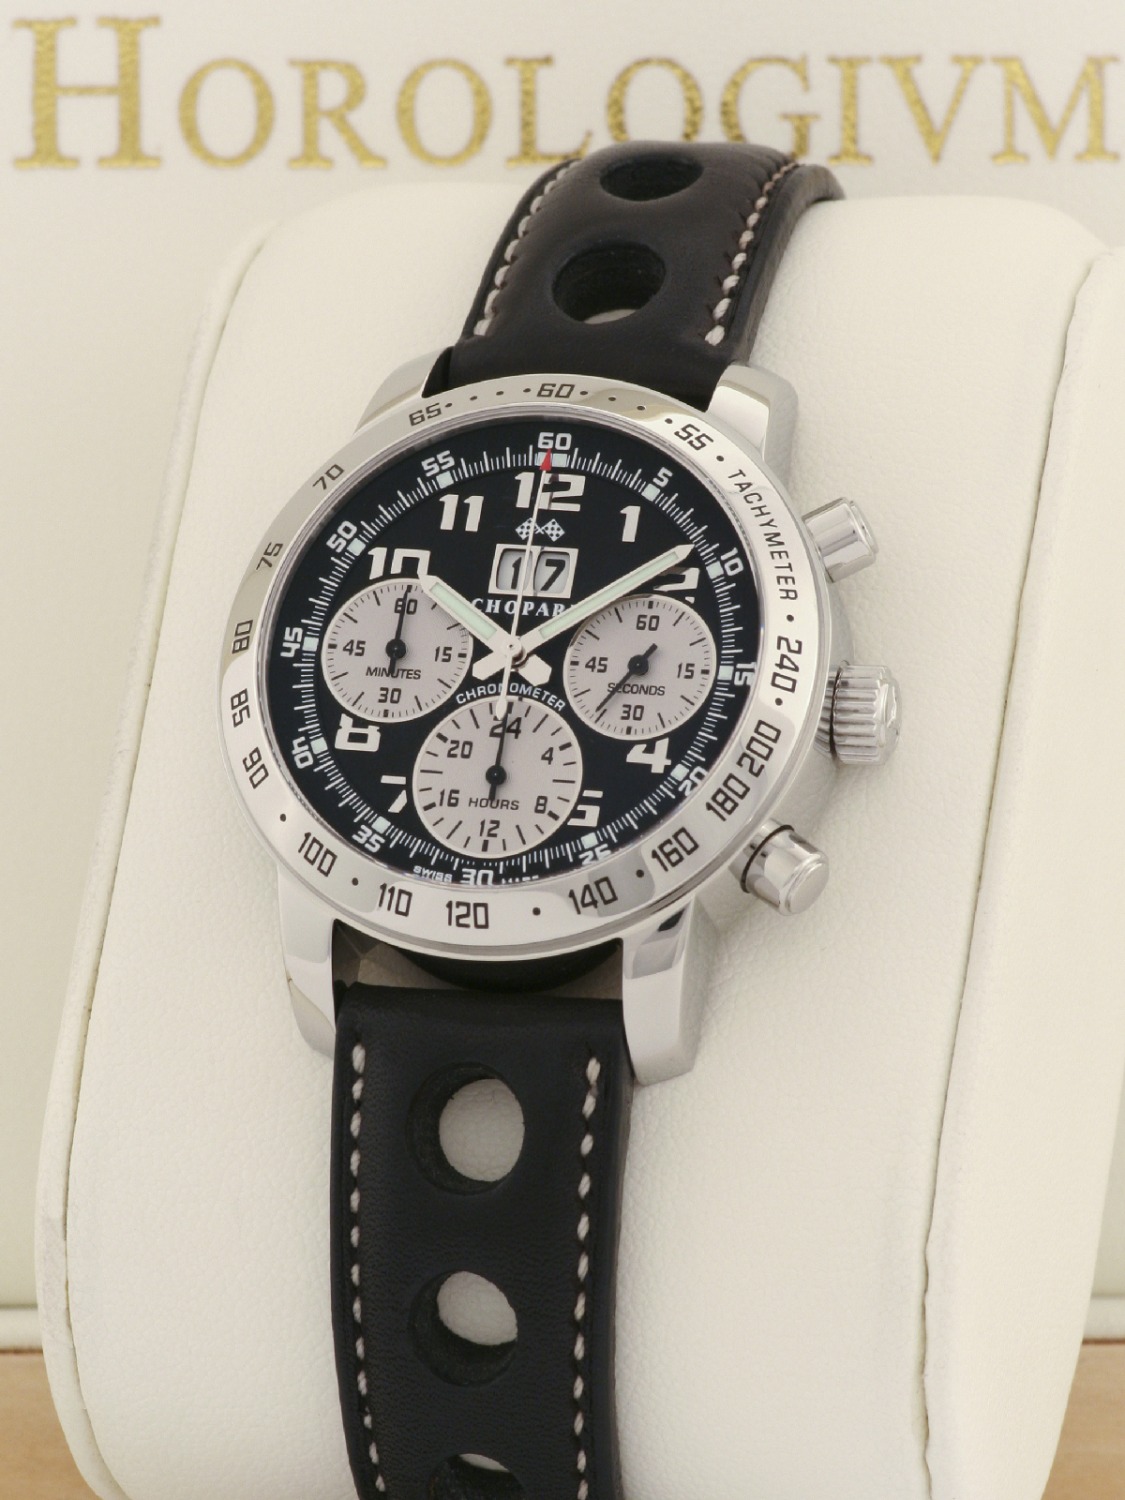 Chopard Mille Miglia Jacky Ickx Limited Edition 1000 Pcs watch, silver